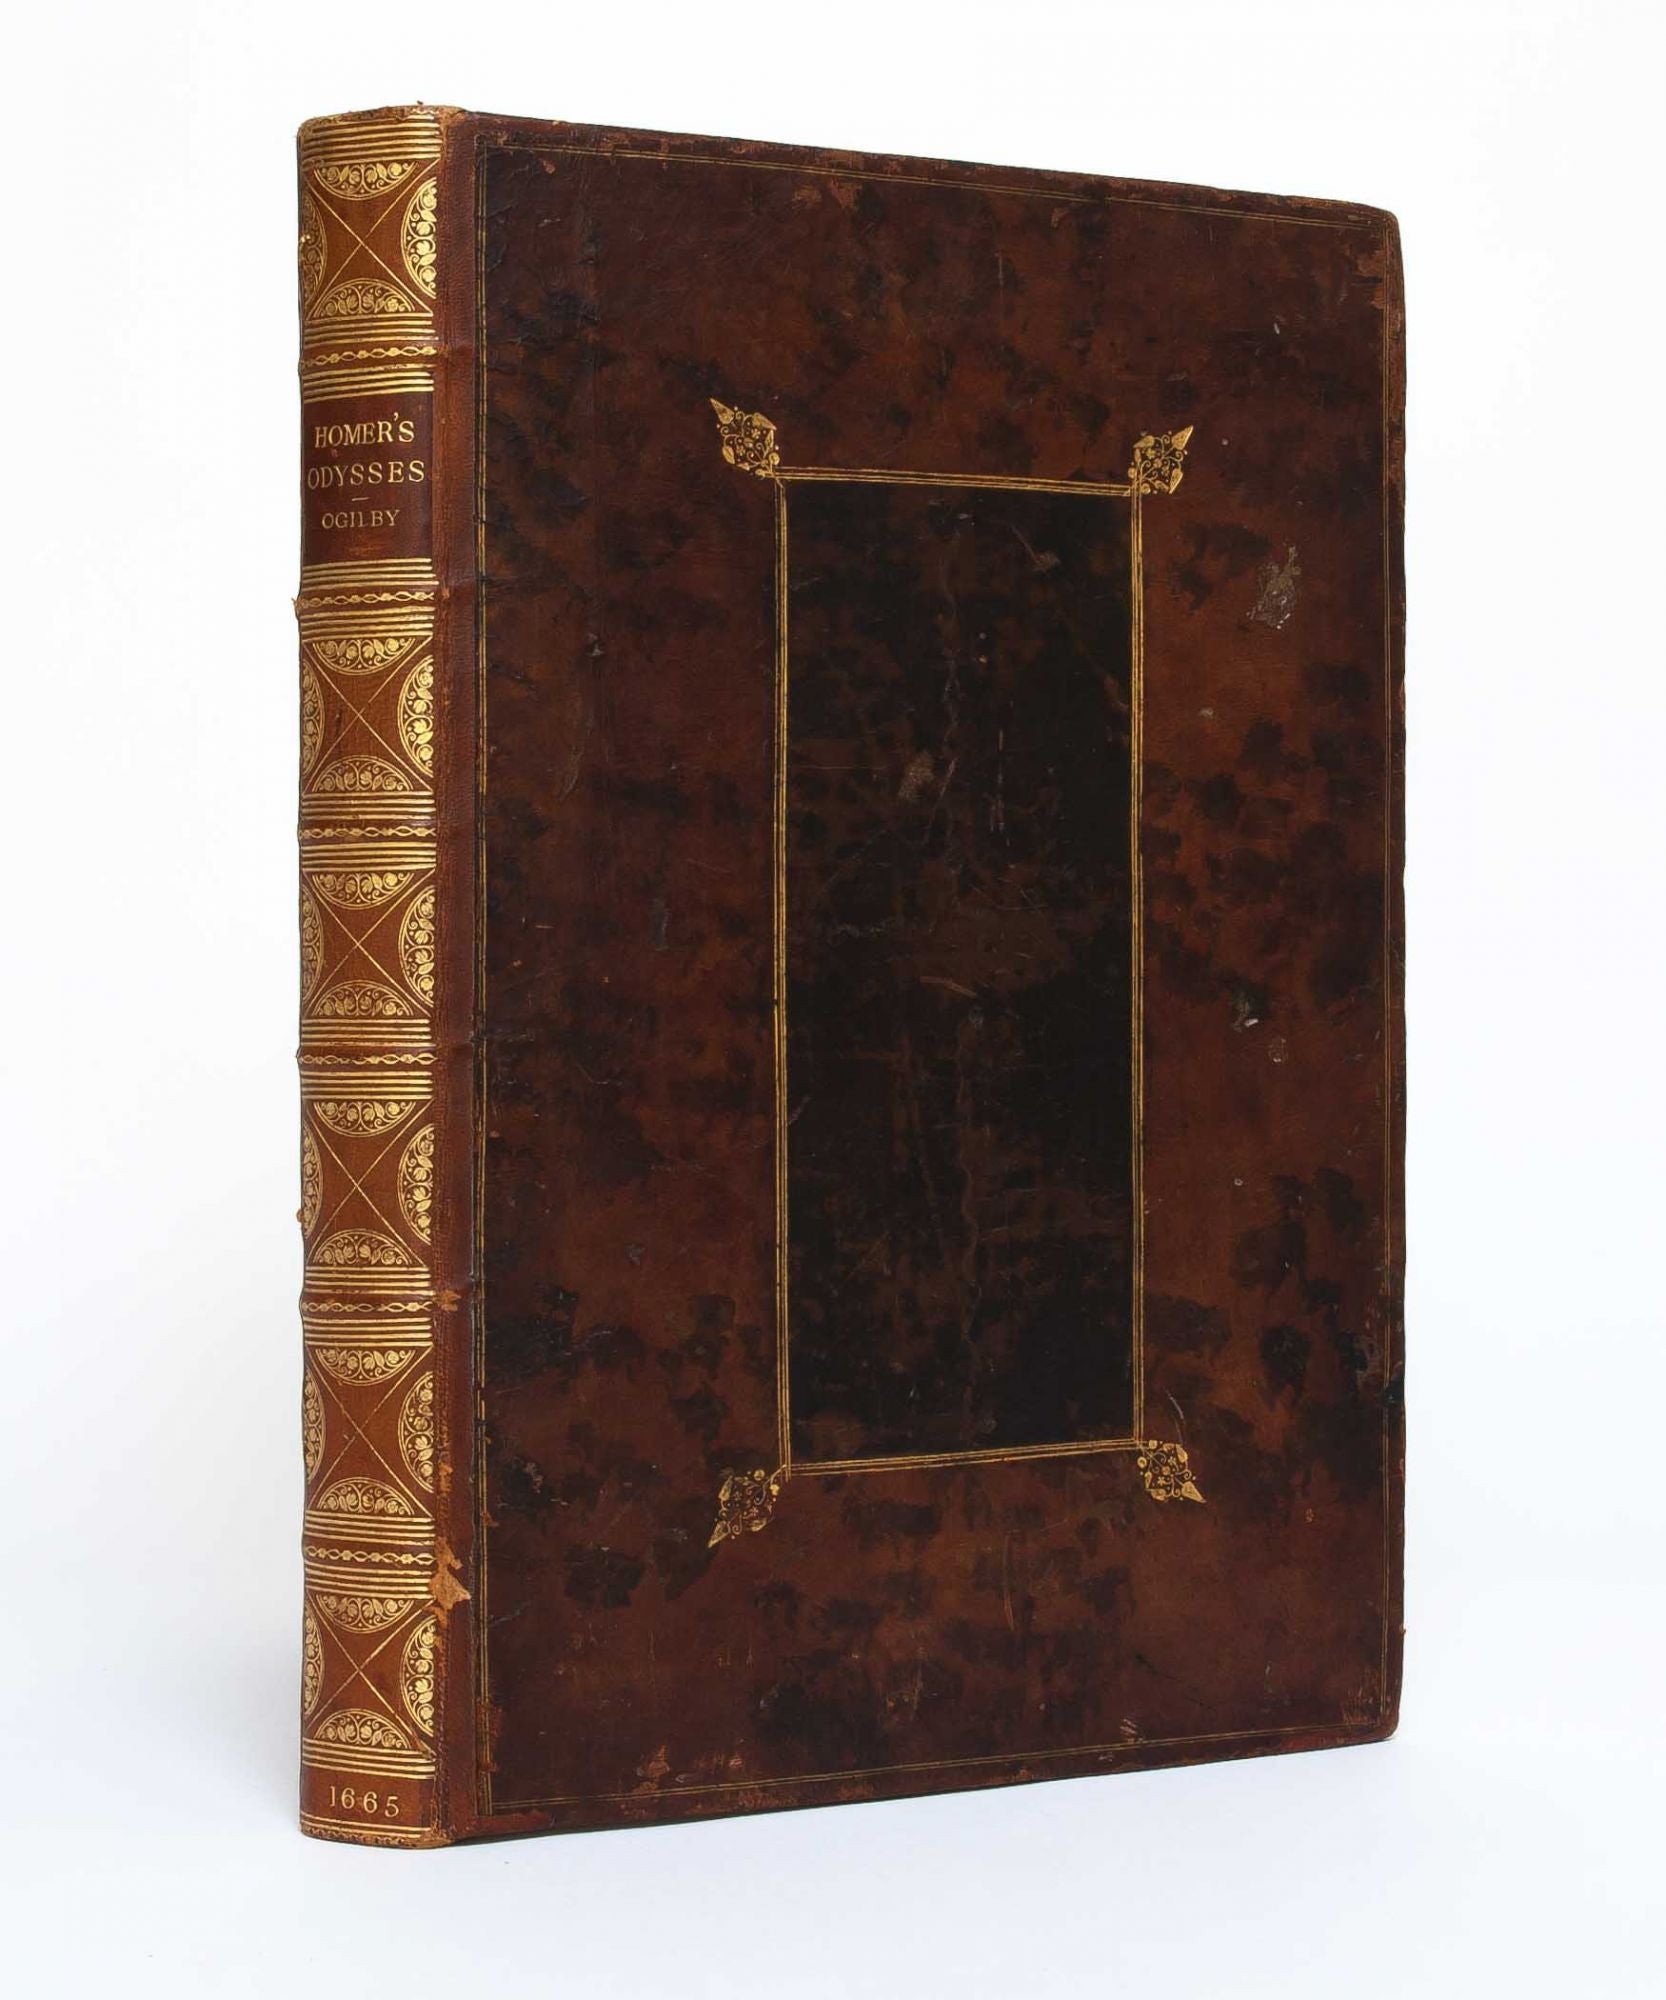 (Item #1686) Homer his Odysses translated, adorn'd with sculpture, and illustrated with annotaions. Homer, John Ogilby.